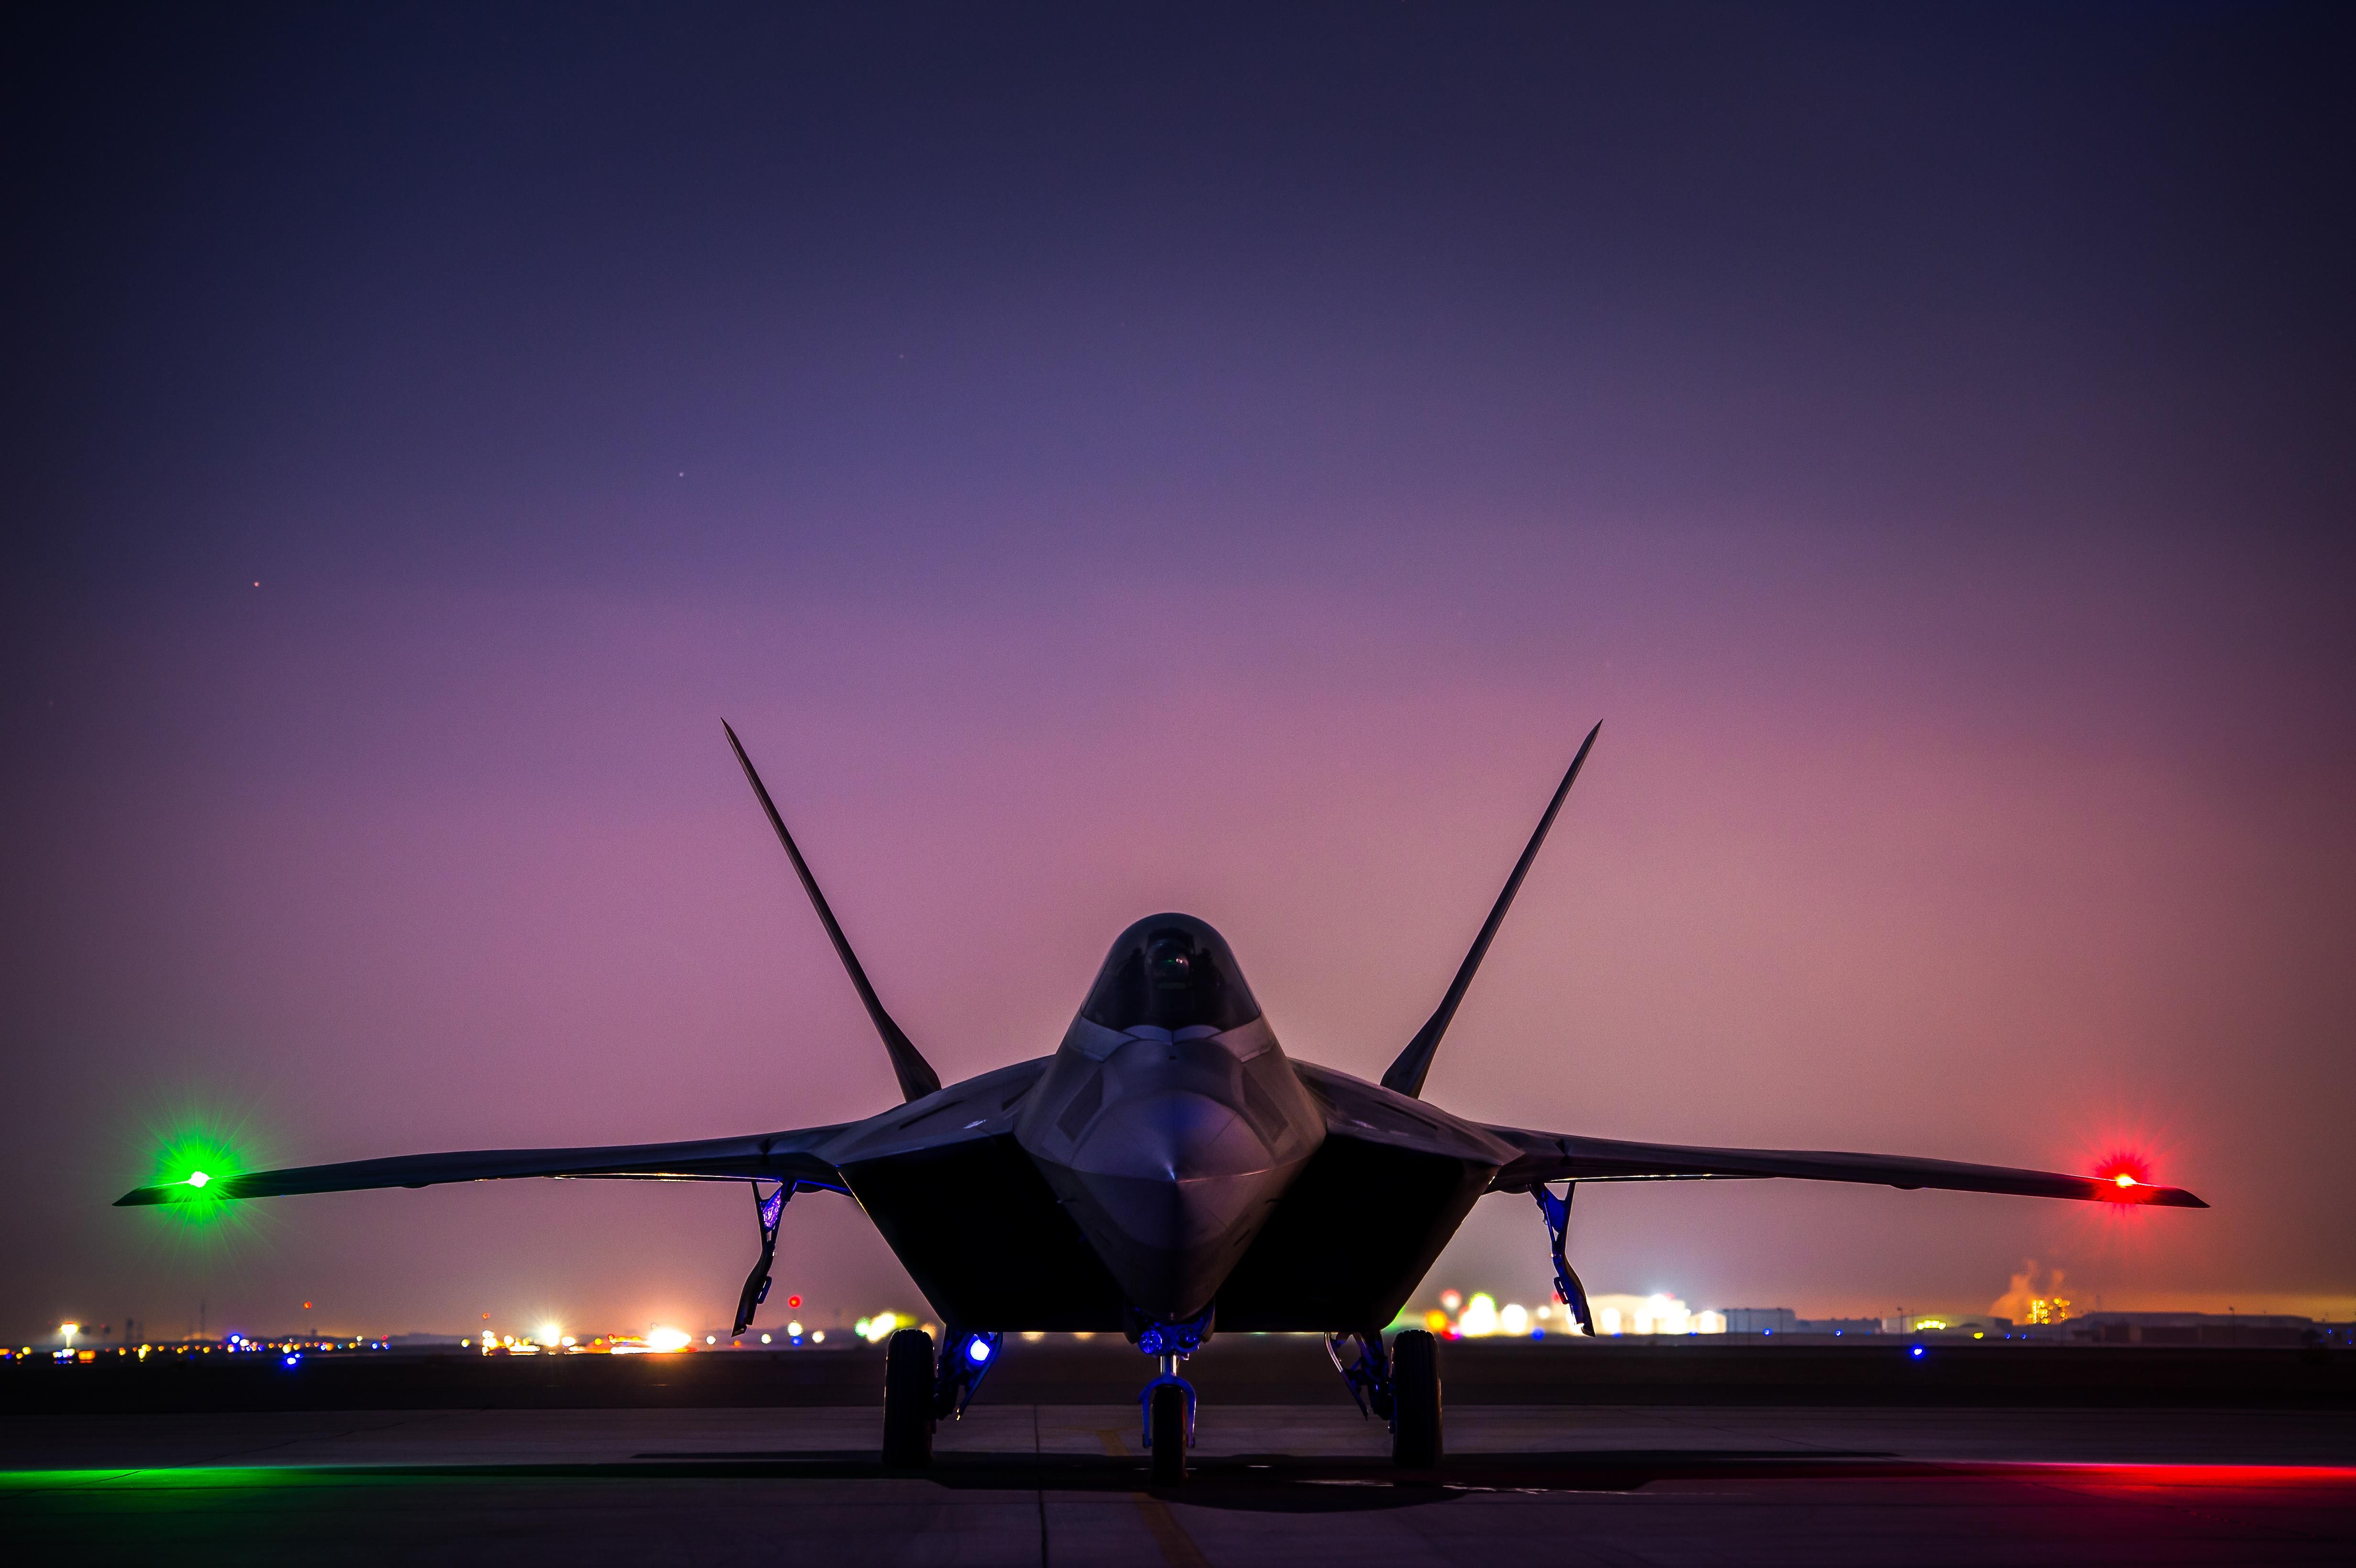 USAF F-22 Raptor During Combat Deployment In Syria Parked At Airbase